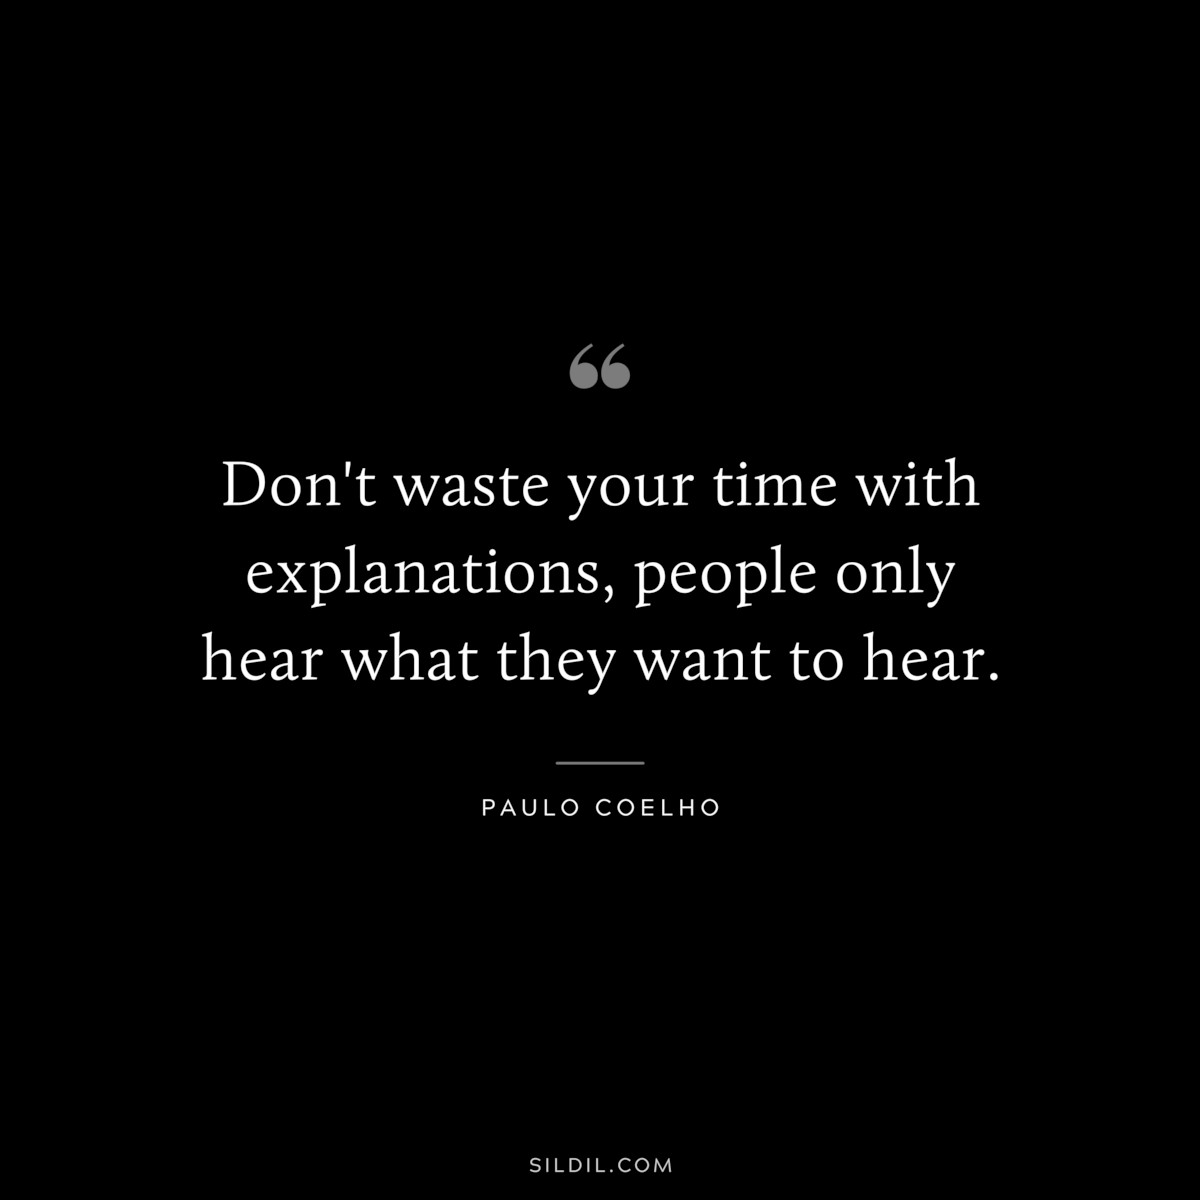 Don't waste your time with explanations, people only hear what they want to hear. ― Paulo Coelho